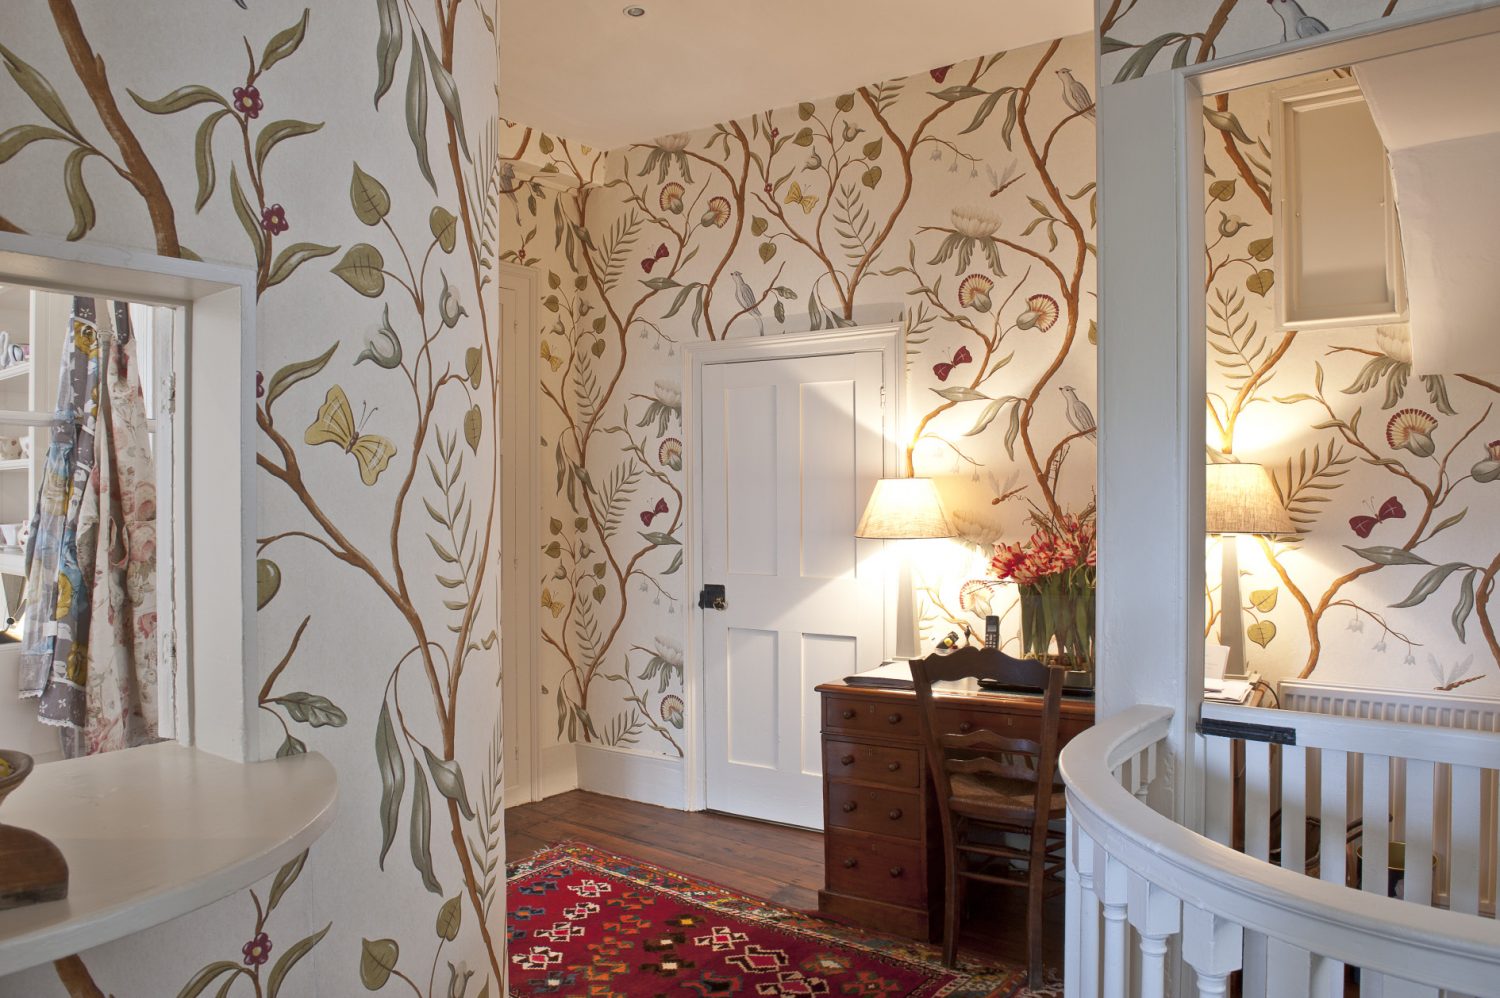 Adam’s Eden by Lewis and Wood, Belinda’s favourite wallpaper, looks very much at home in the hallway